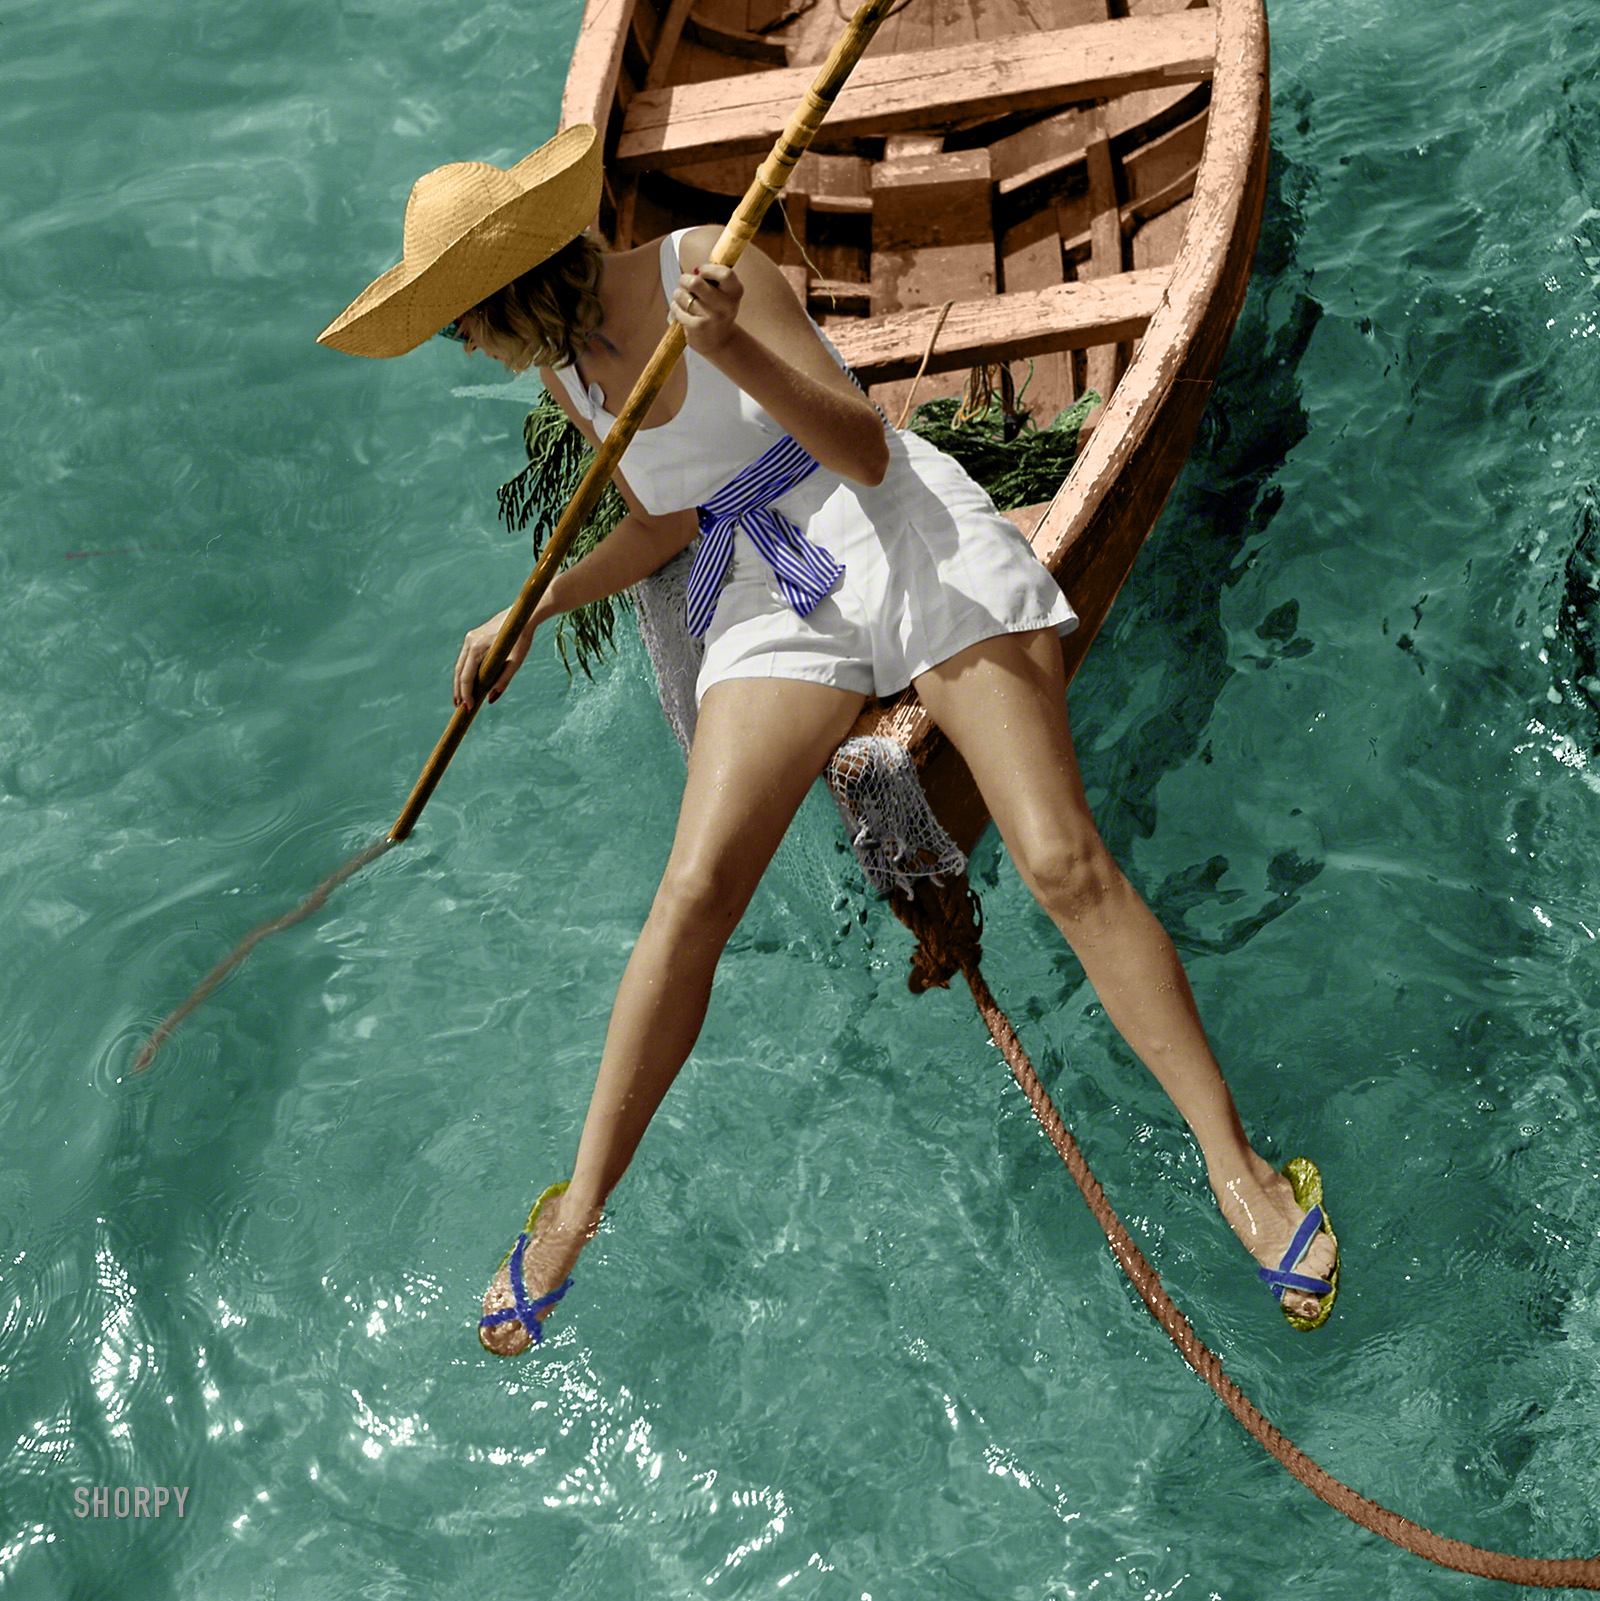 Colorized from this Shorpy original. I started to wonder what she looked like in color. Well now I do. View full size.

UPDATED: I found a mistake on the shoulder of this one that I cleaned up [BAXADO]